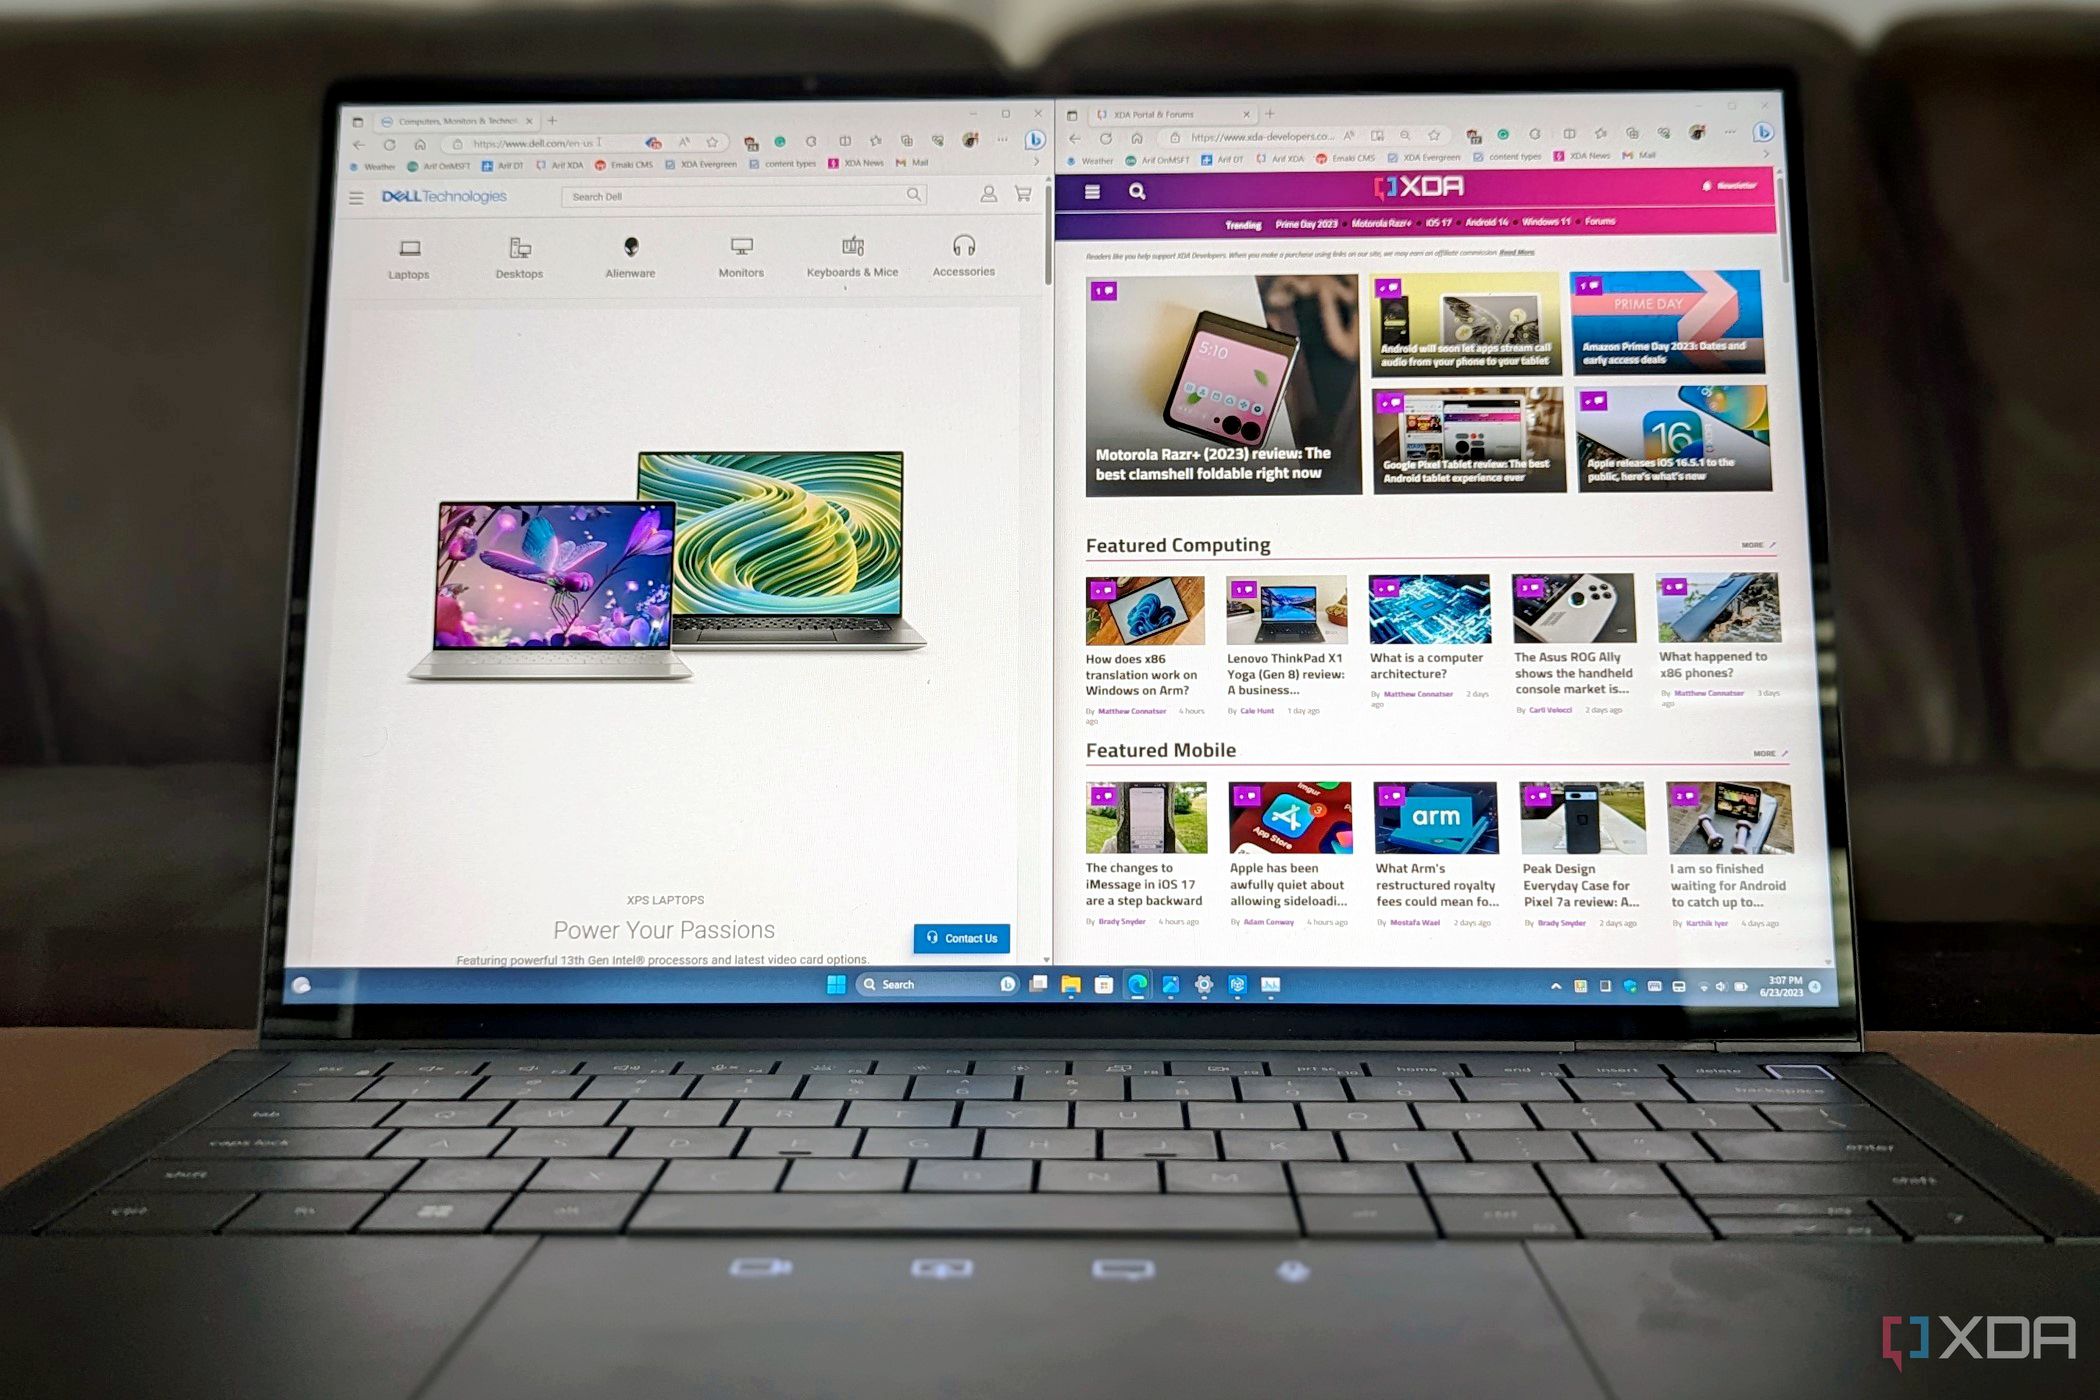 Here's how you can install Microsoft Edge on Chrome OS, even